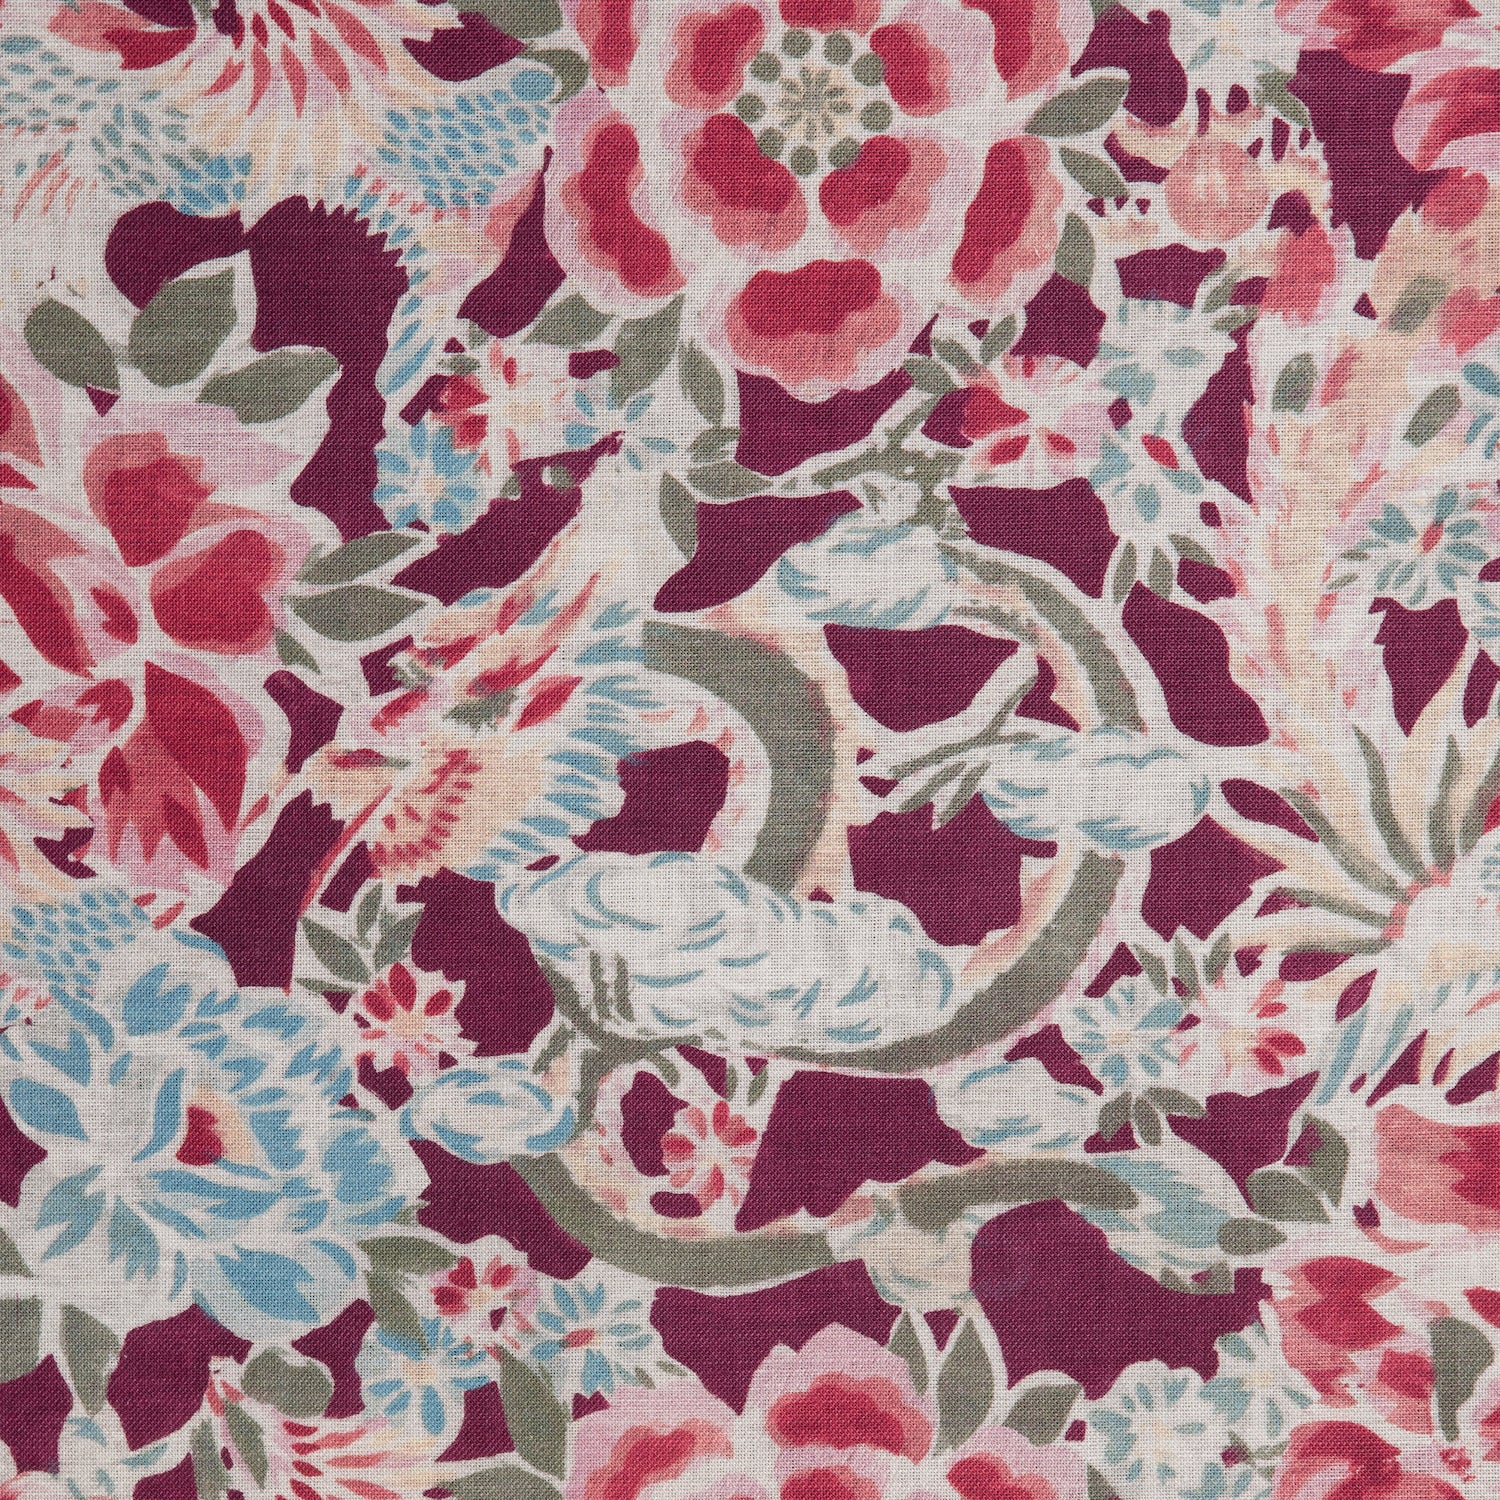 Detail of a linen fabric in a painterly floral pattern in shades of blue, green and pink on a maroon field.